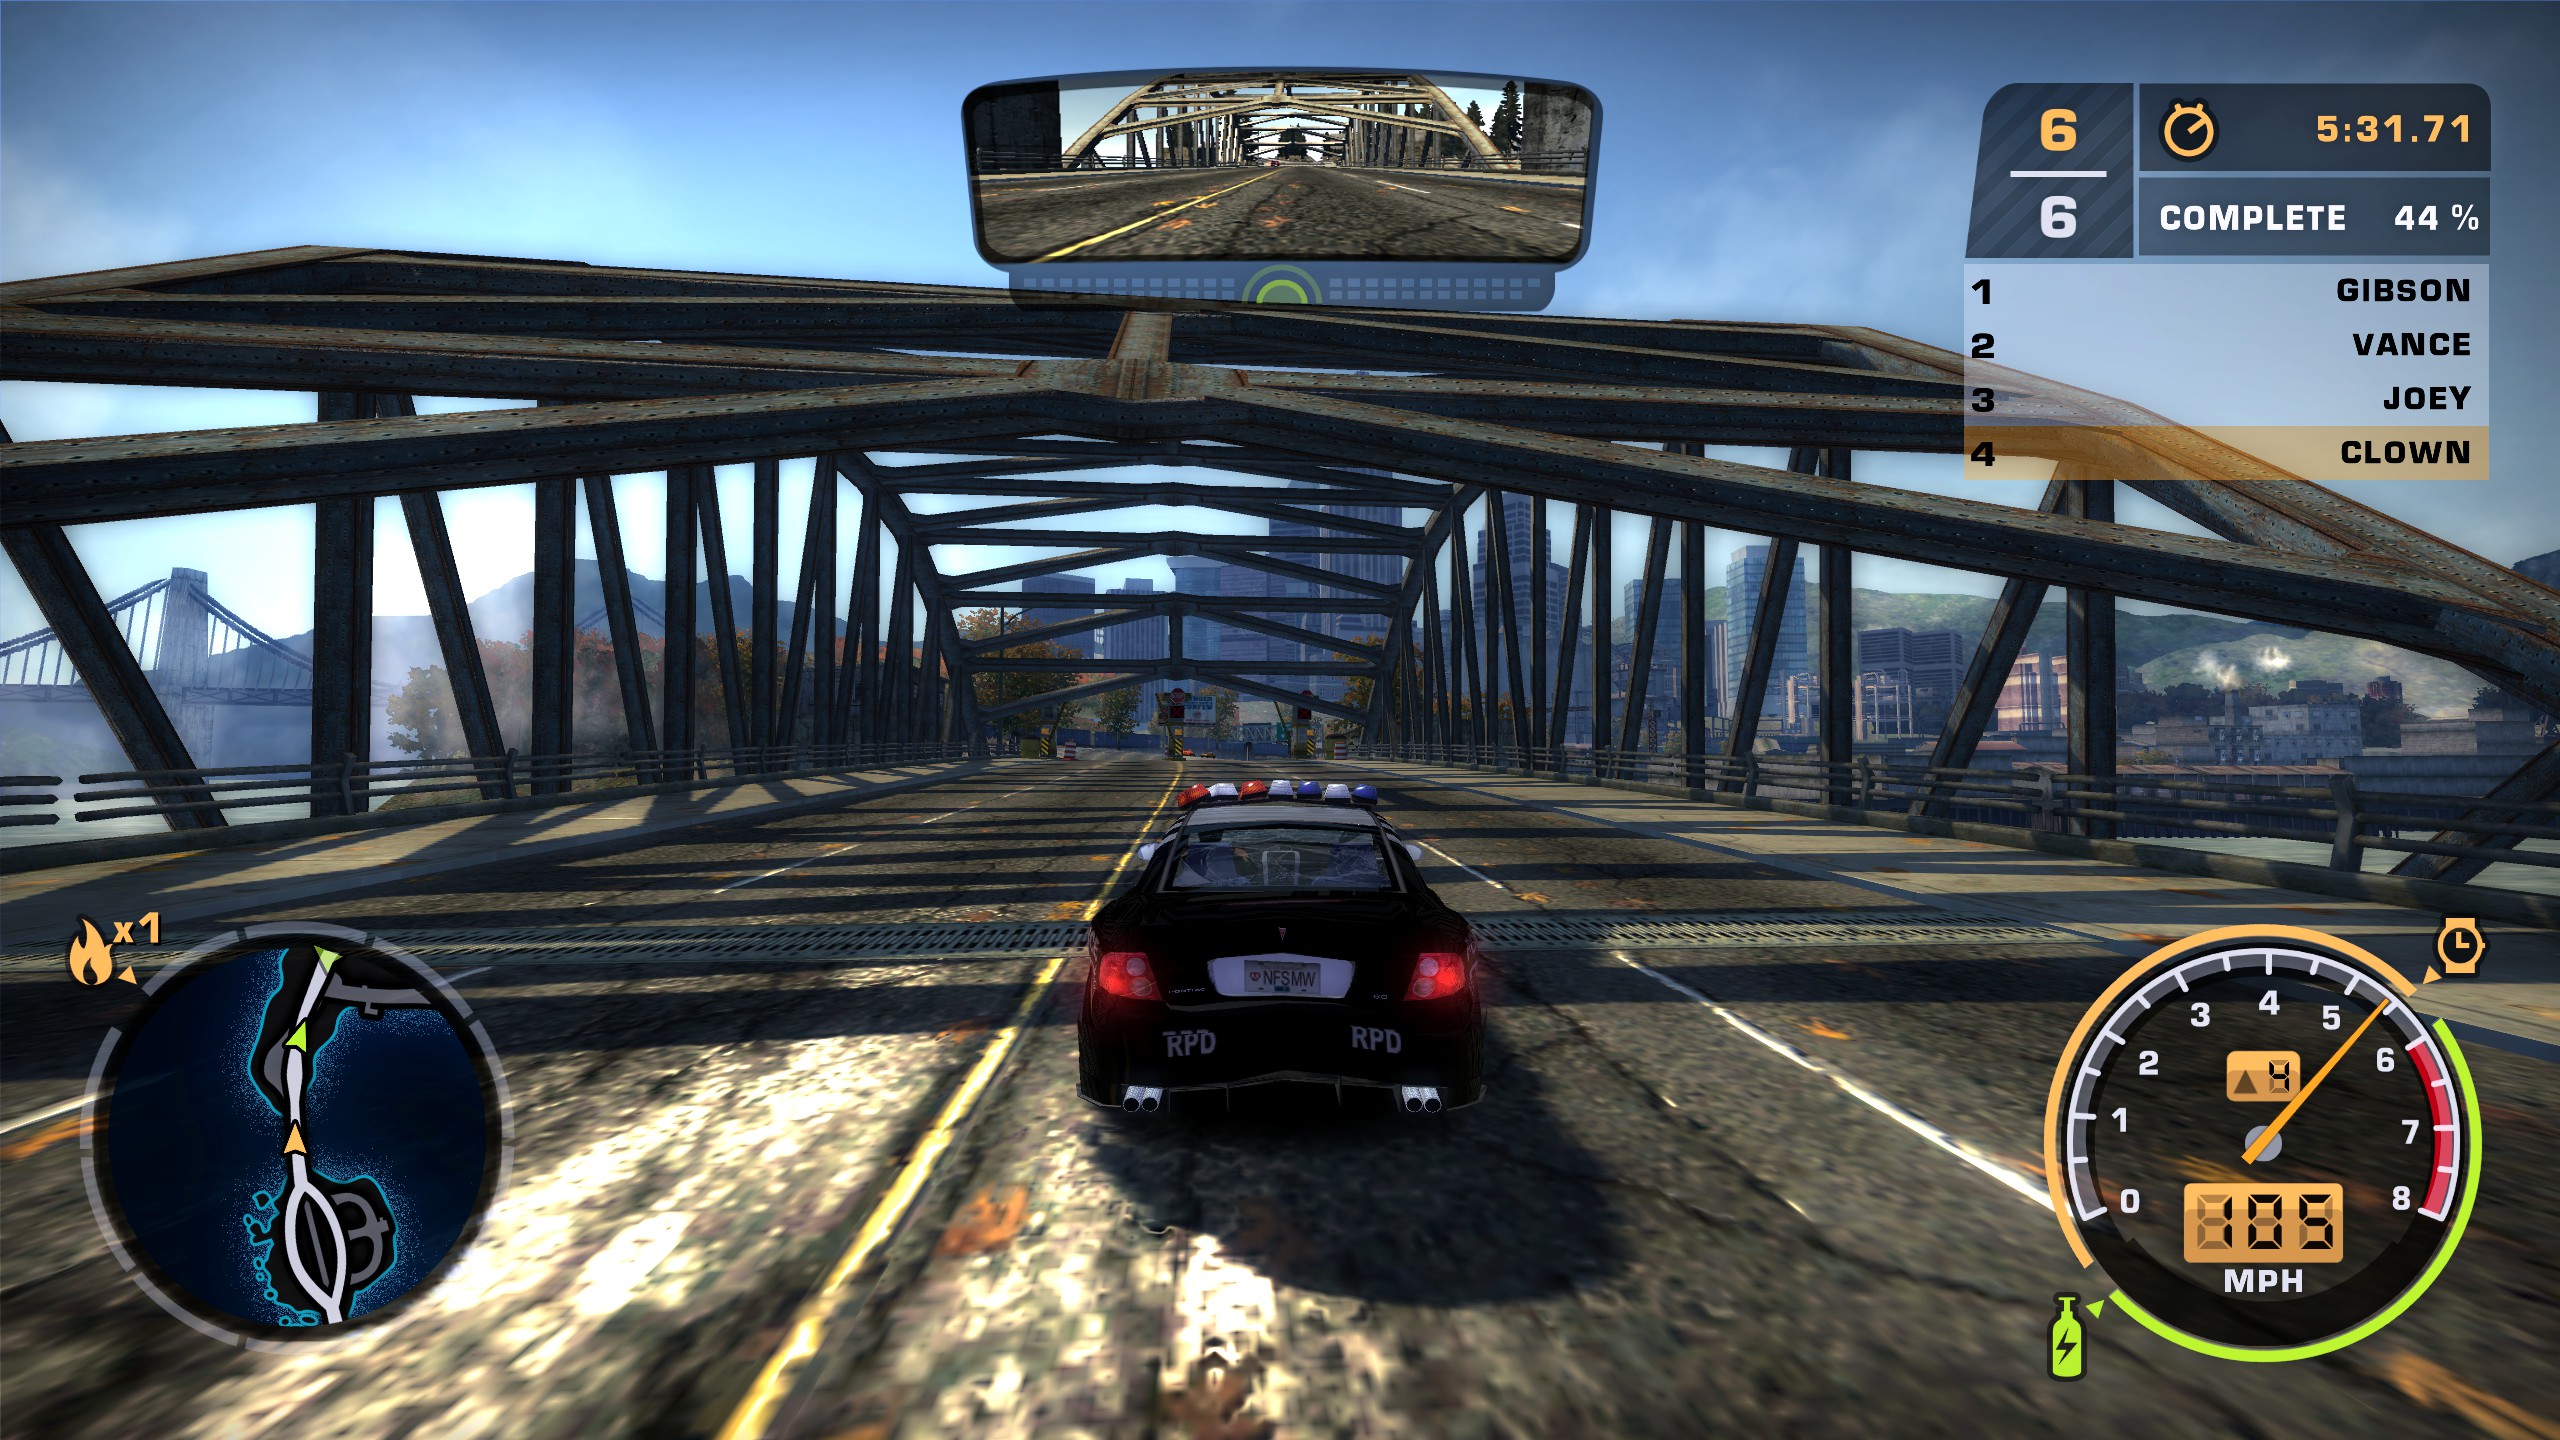 Need for Speed: Most Wanted (2005), NFS:MW